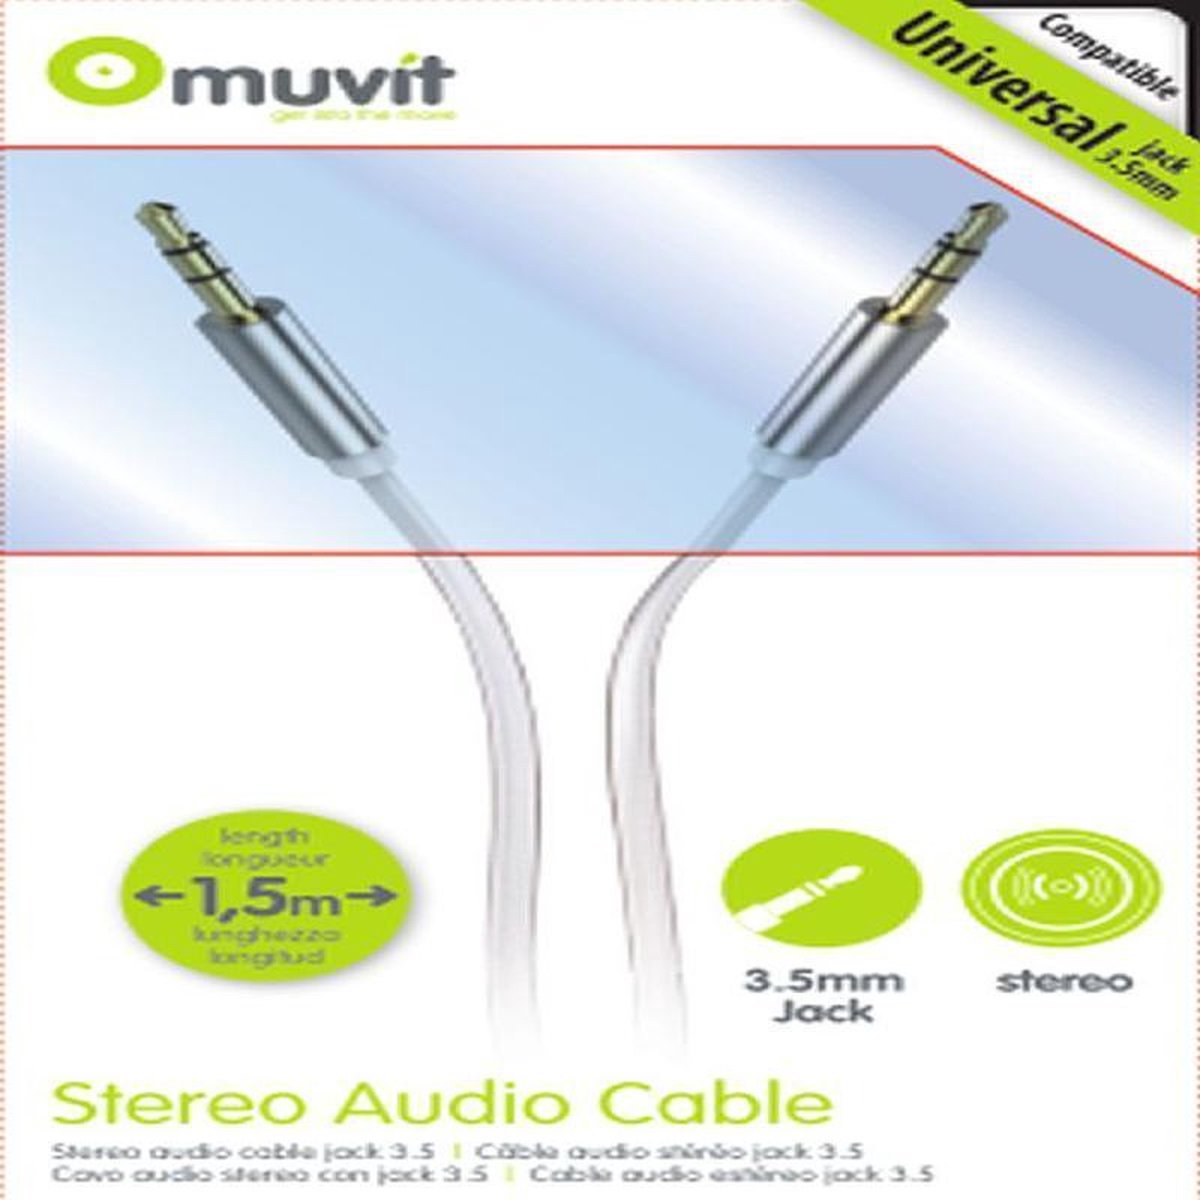 muvit Stereo Cable Metal Jack 1.5 meter 3.5mm-3.5mm Flat Cable White